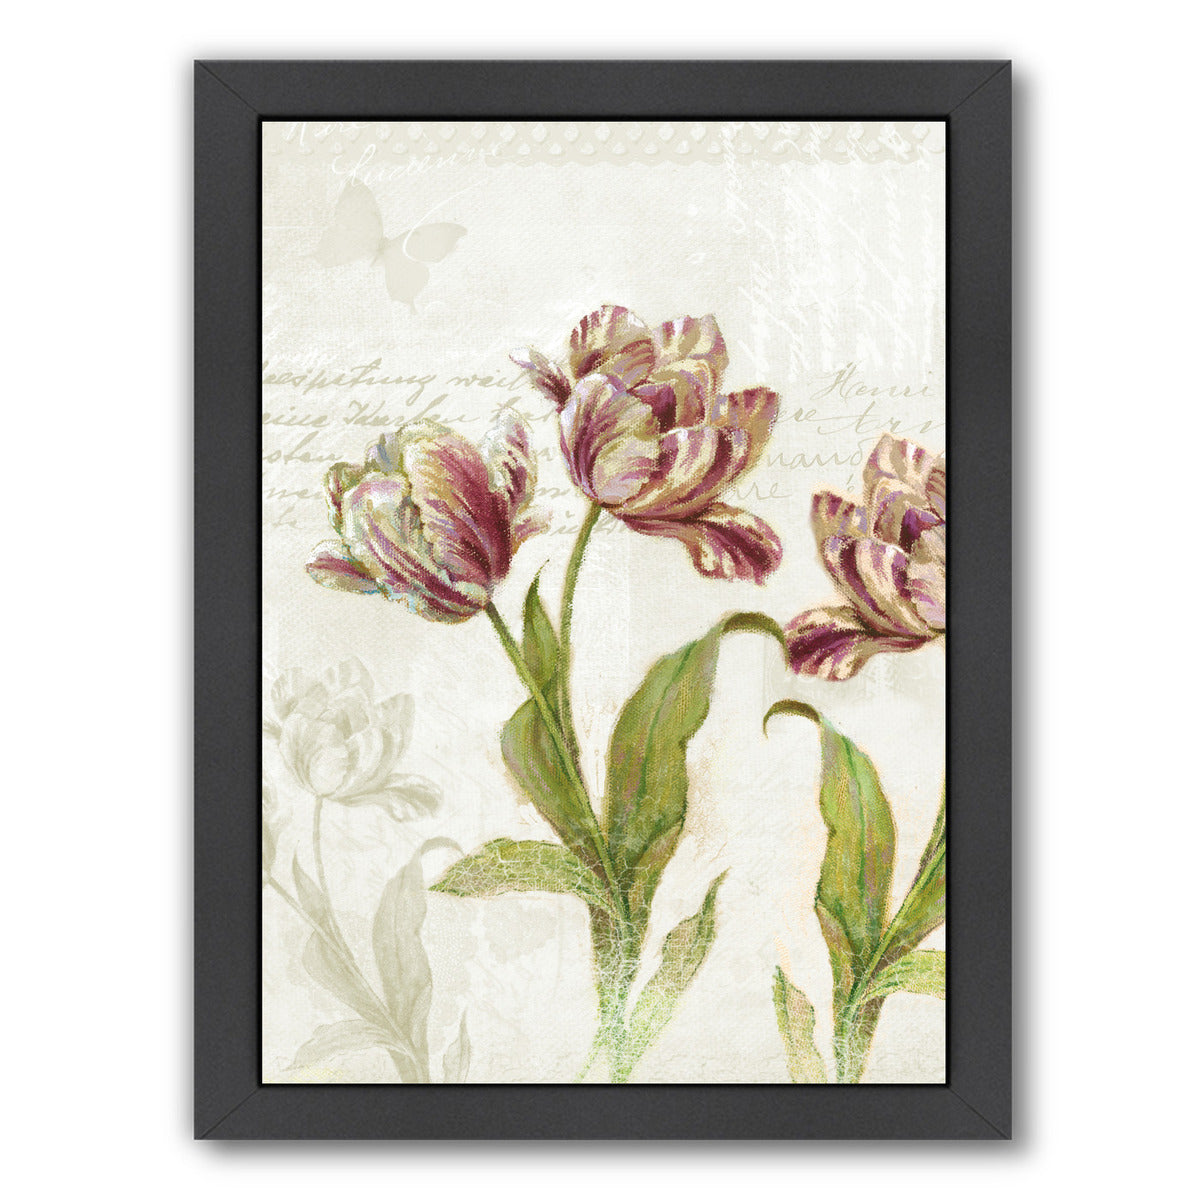 Vintage Tulips by Harrison Ripley Framed Print - Americanflat